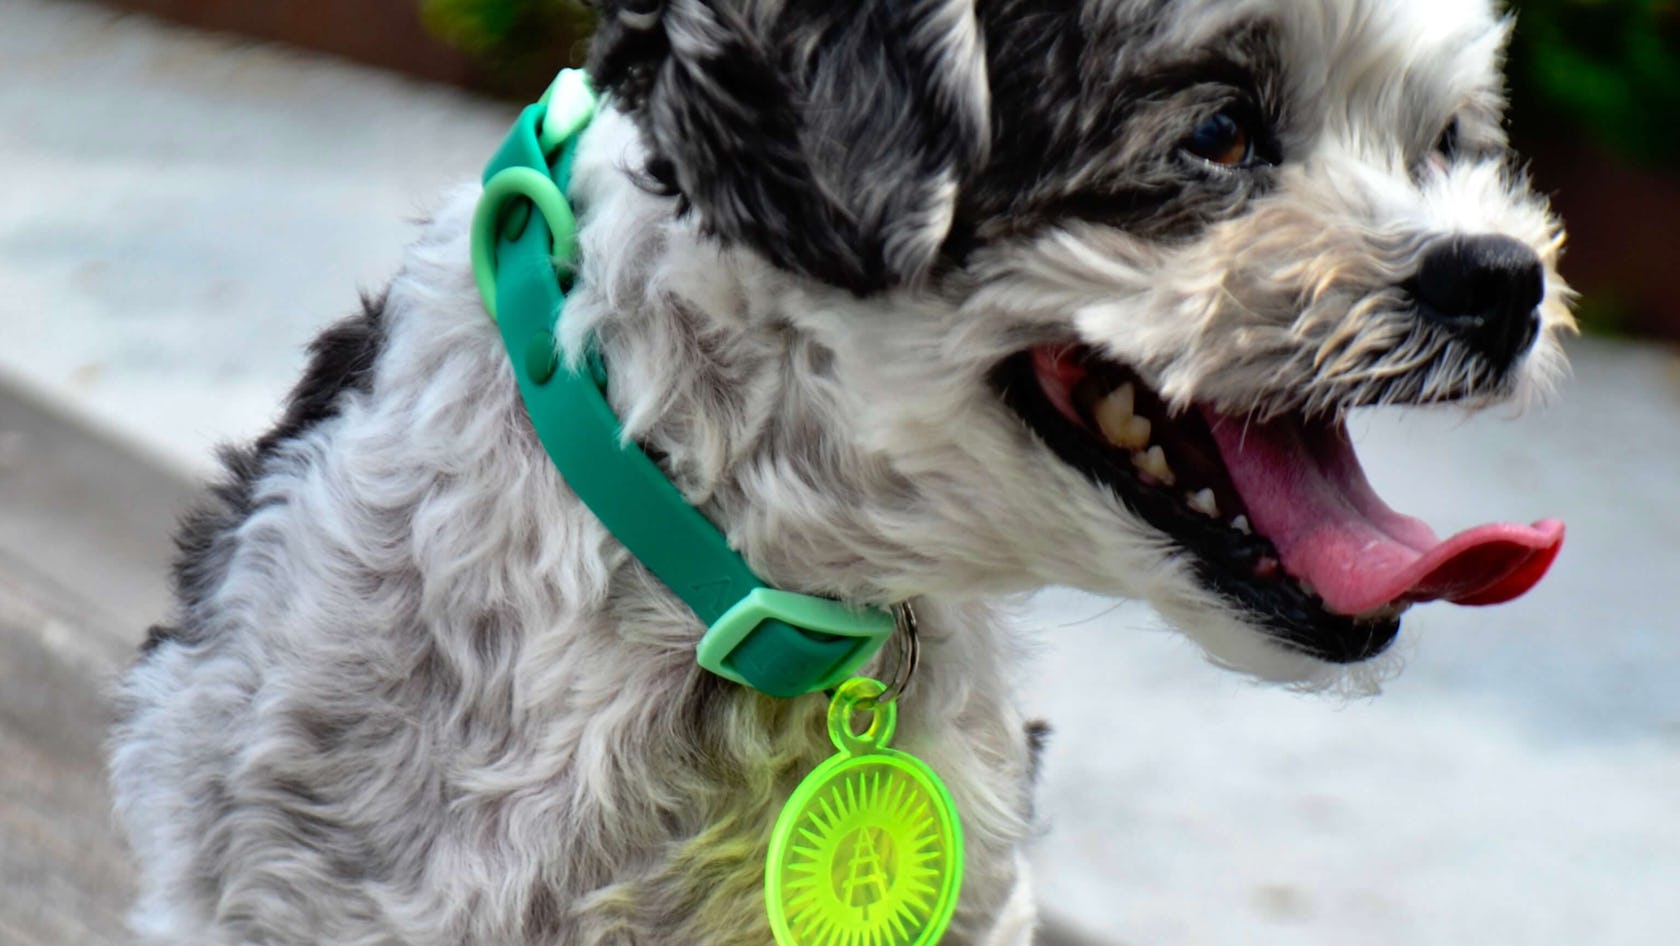 A white dog with black spots pants and is wearing a collar with a Rail Park logo dog tag